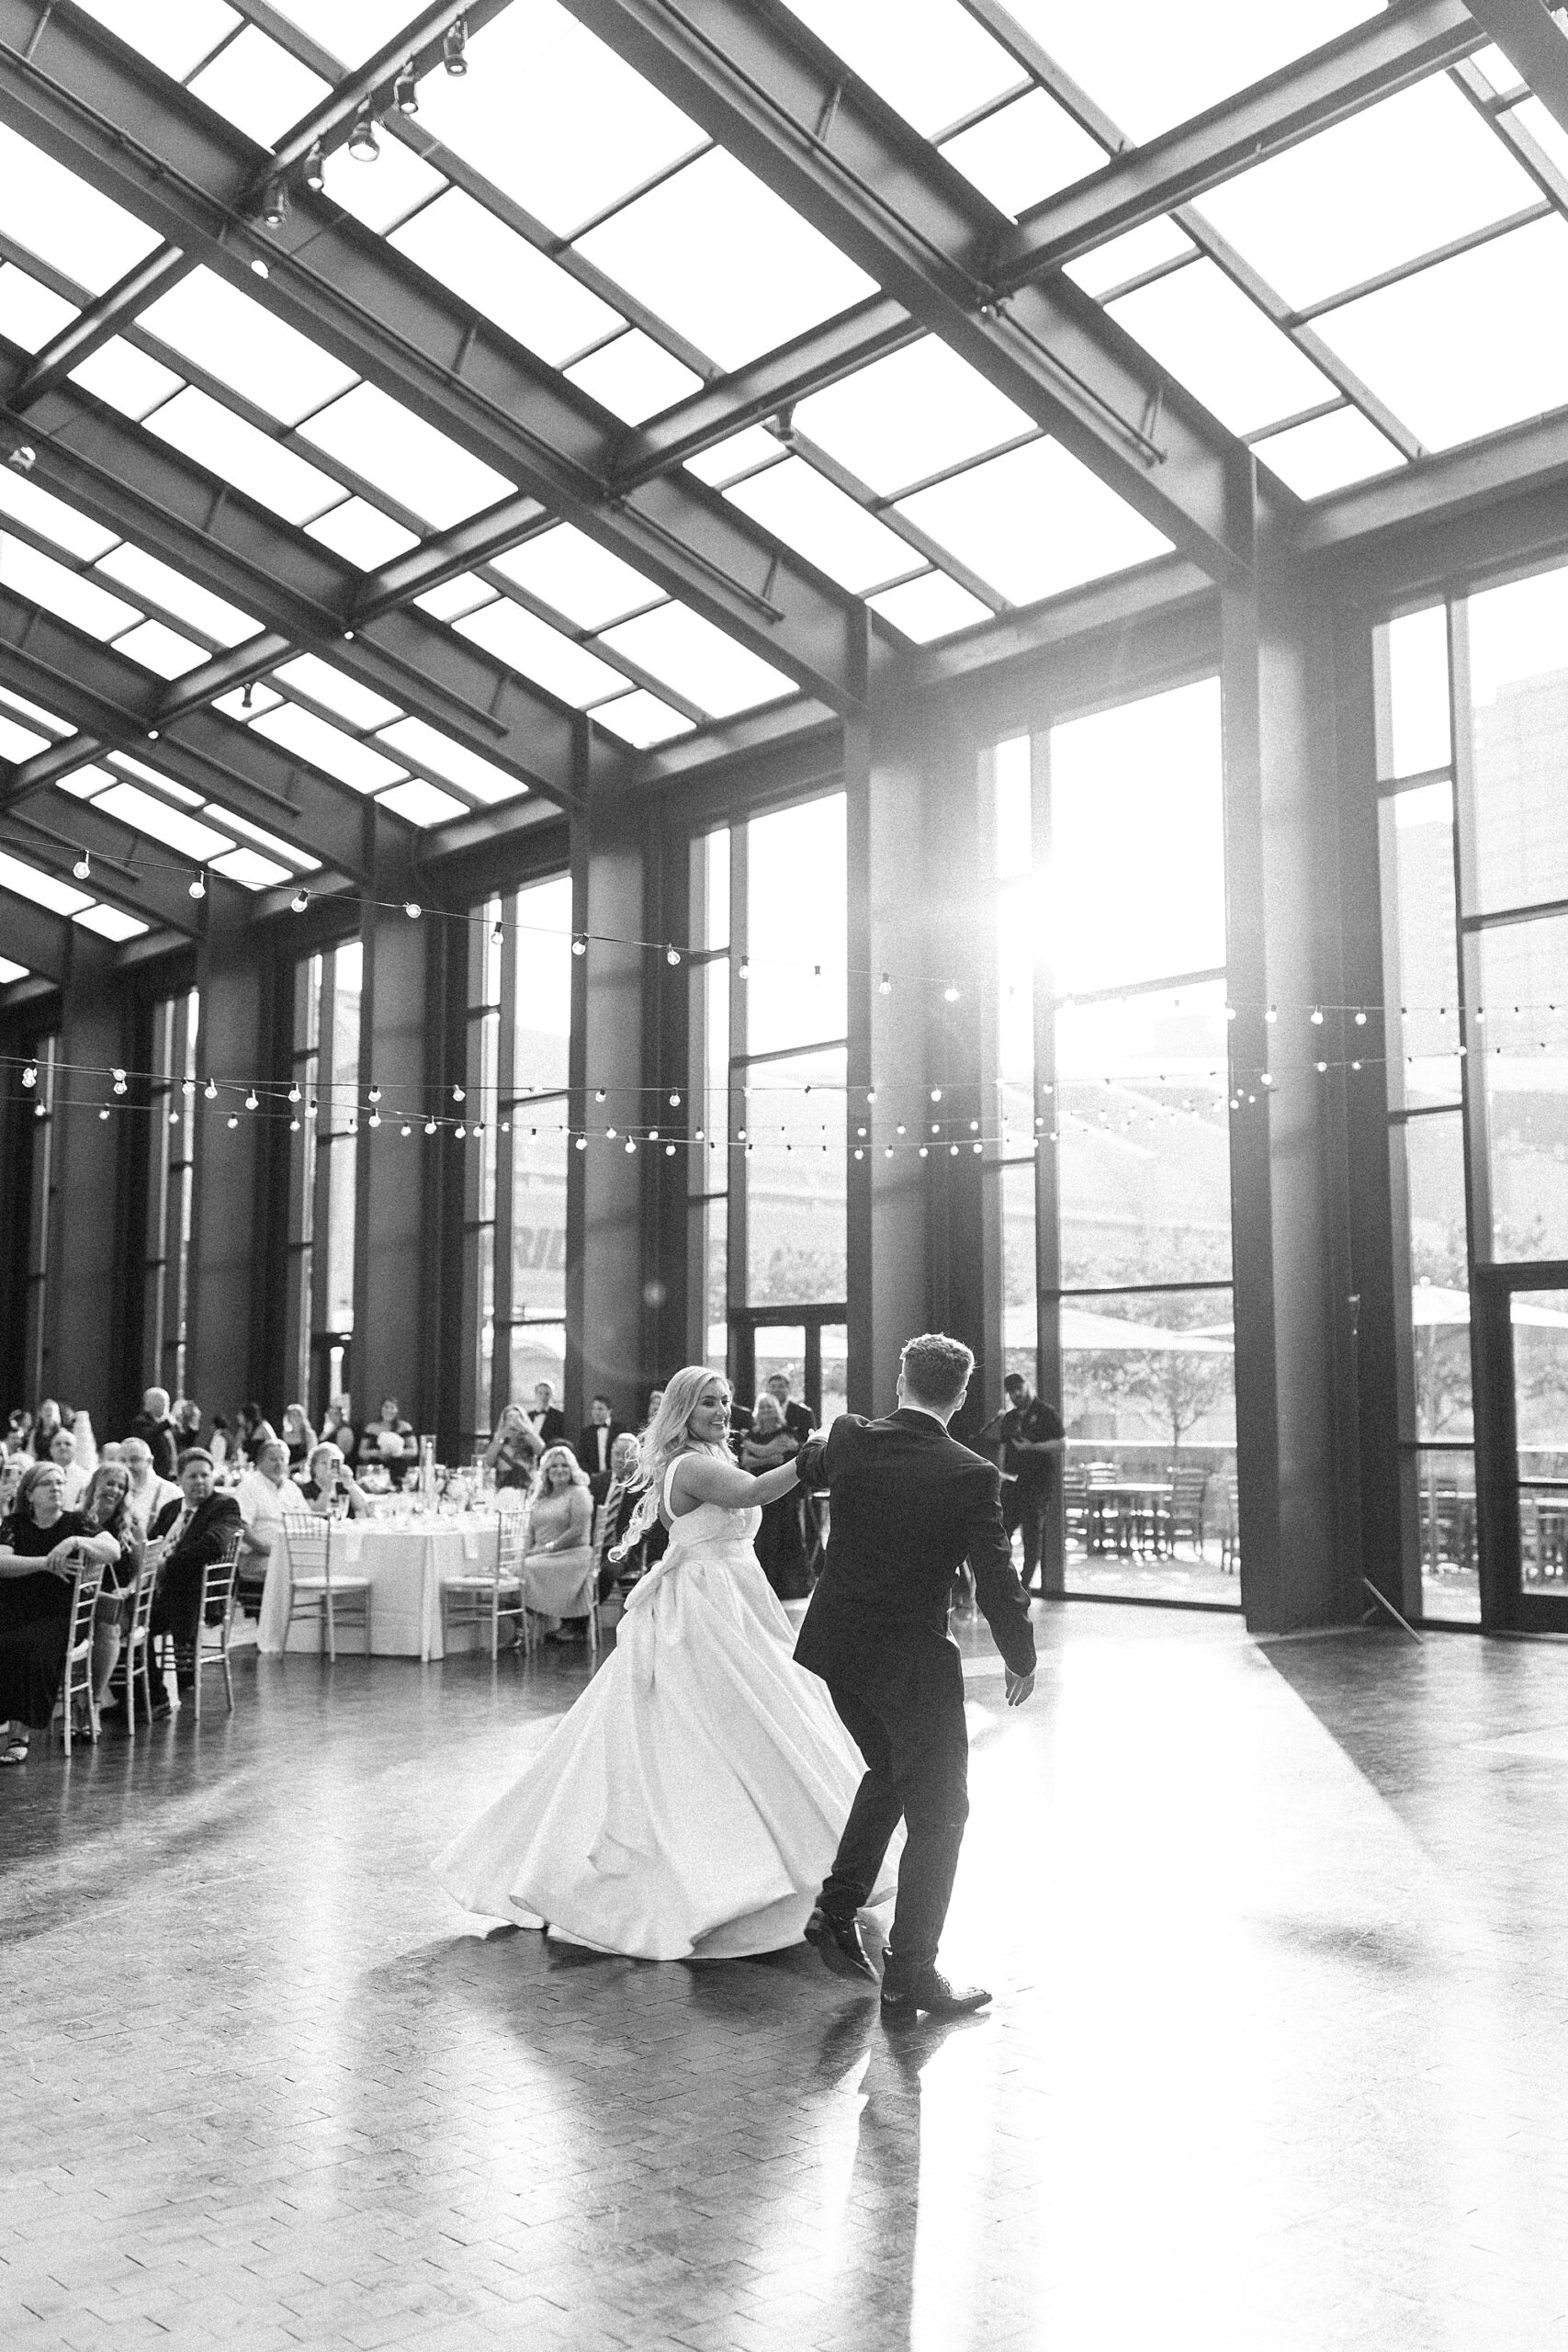 newlyweds dance at Elegant Nashville Wedding reception at The Country Music Hall of Fame